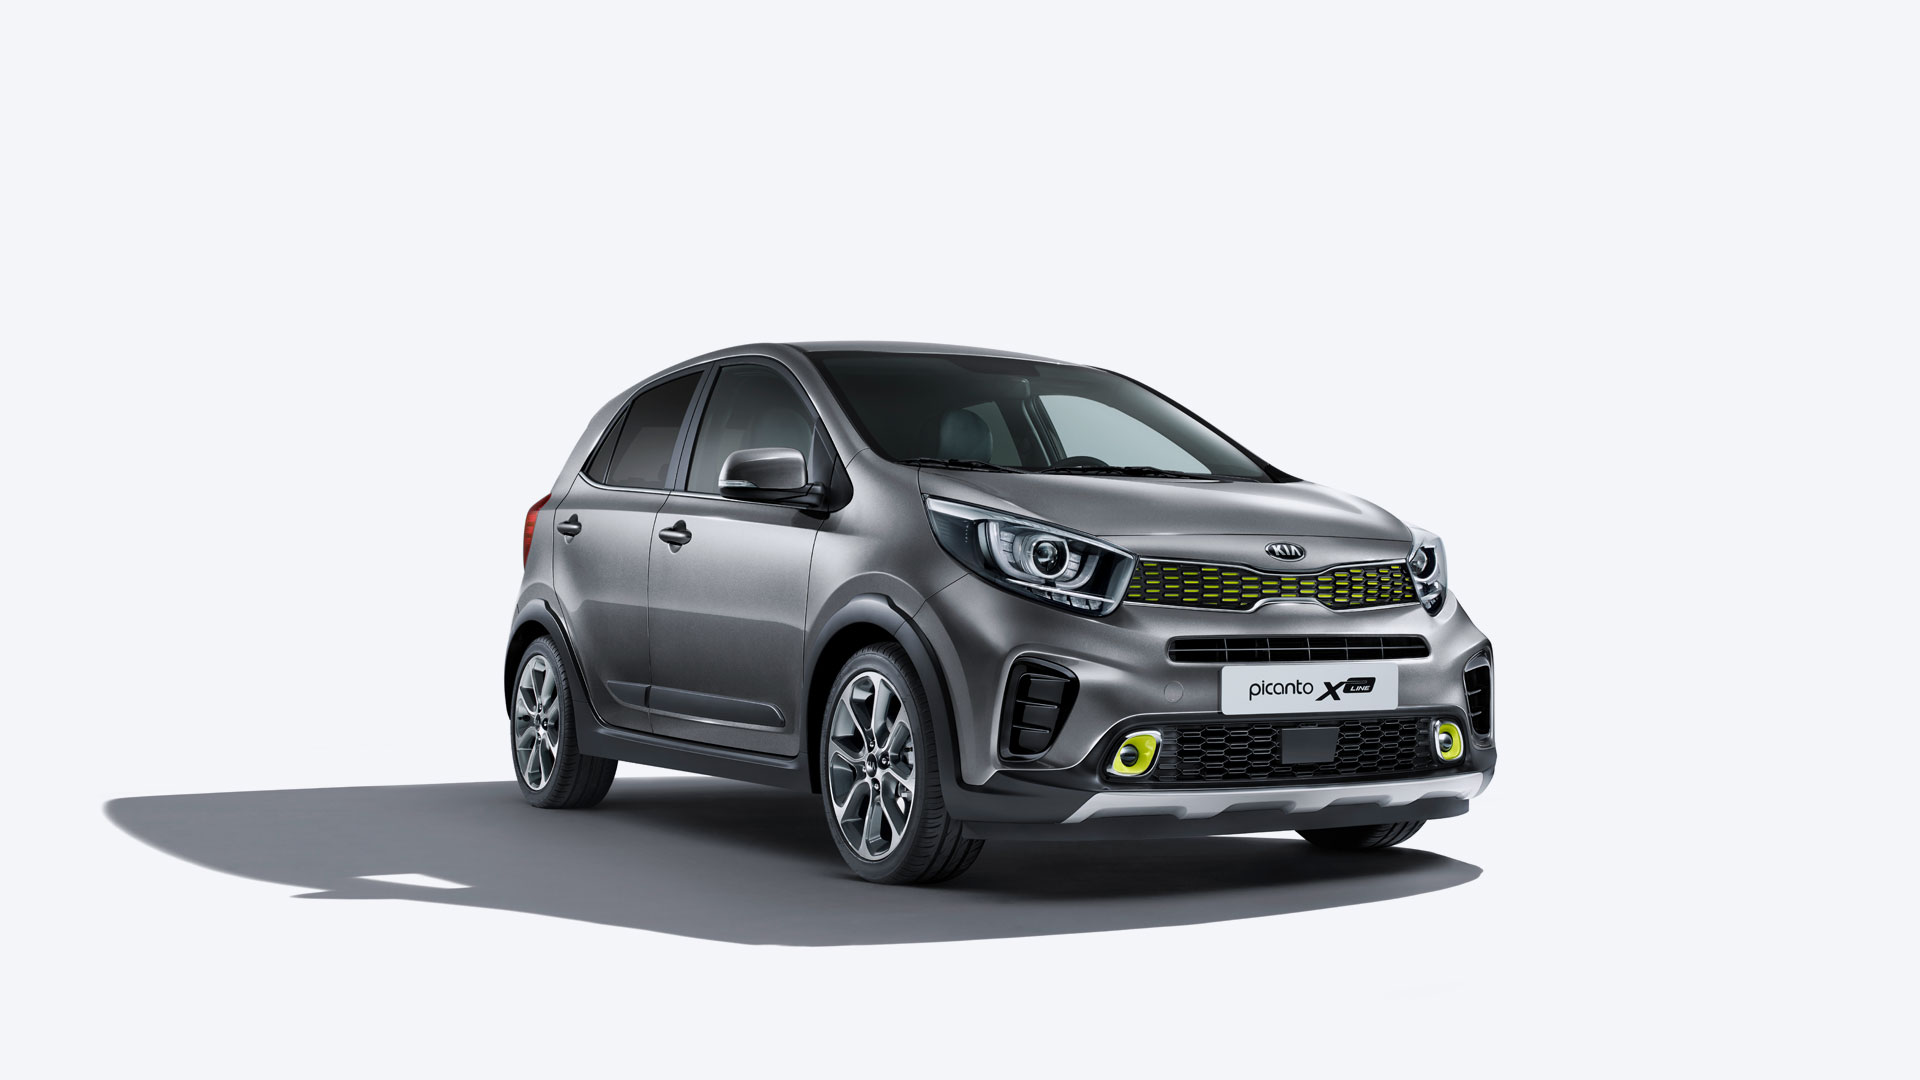 Turbocharged engine and crossover-inspired design for all-new Kia Picanto  X-Line